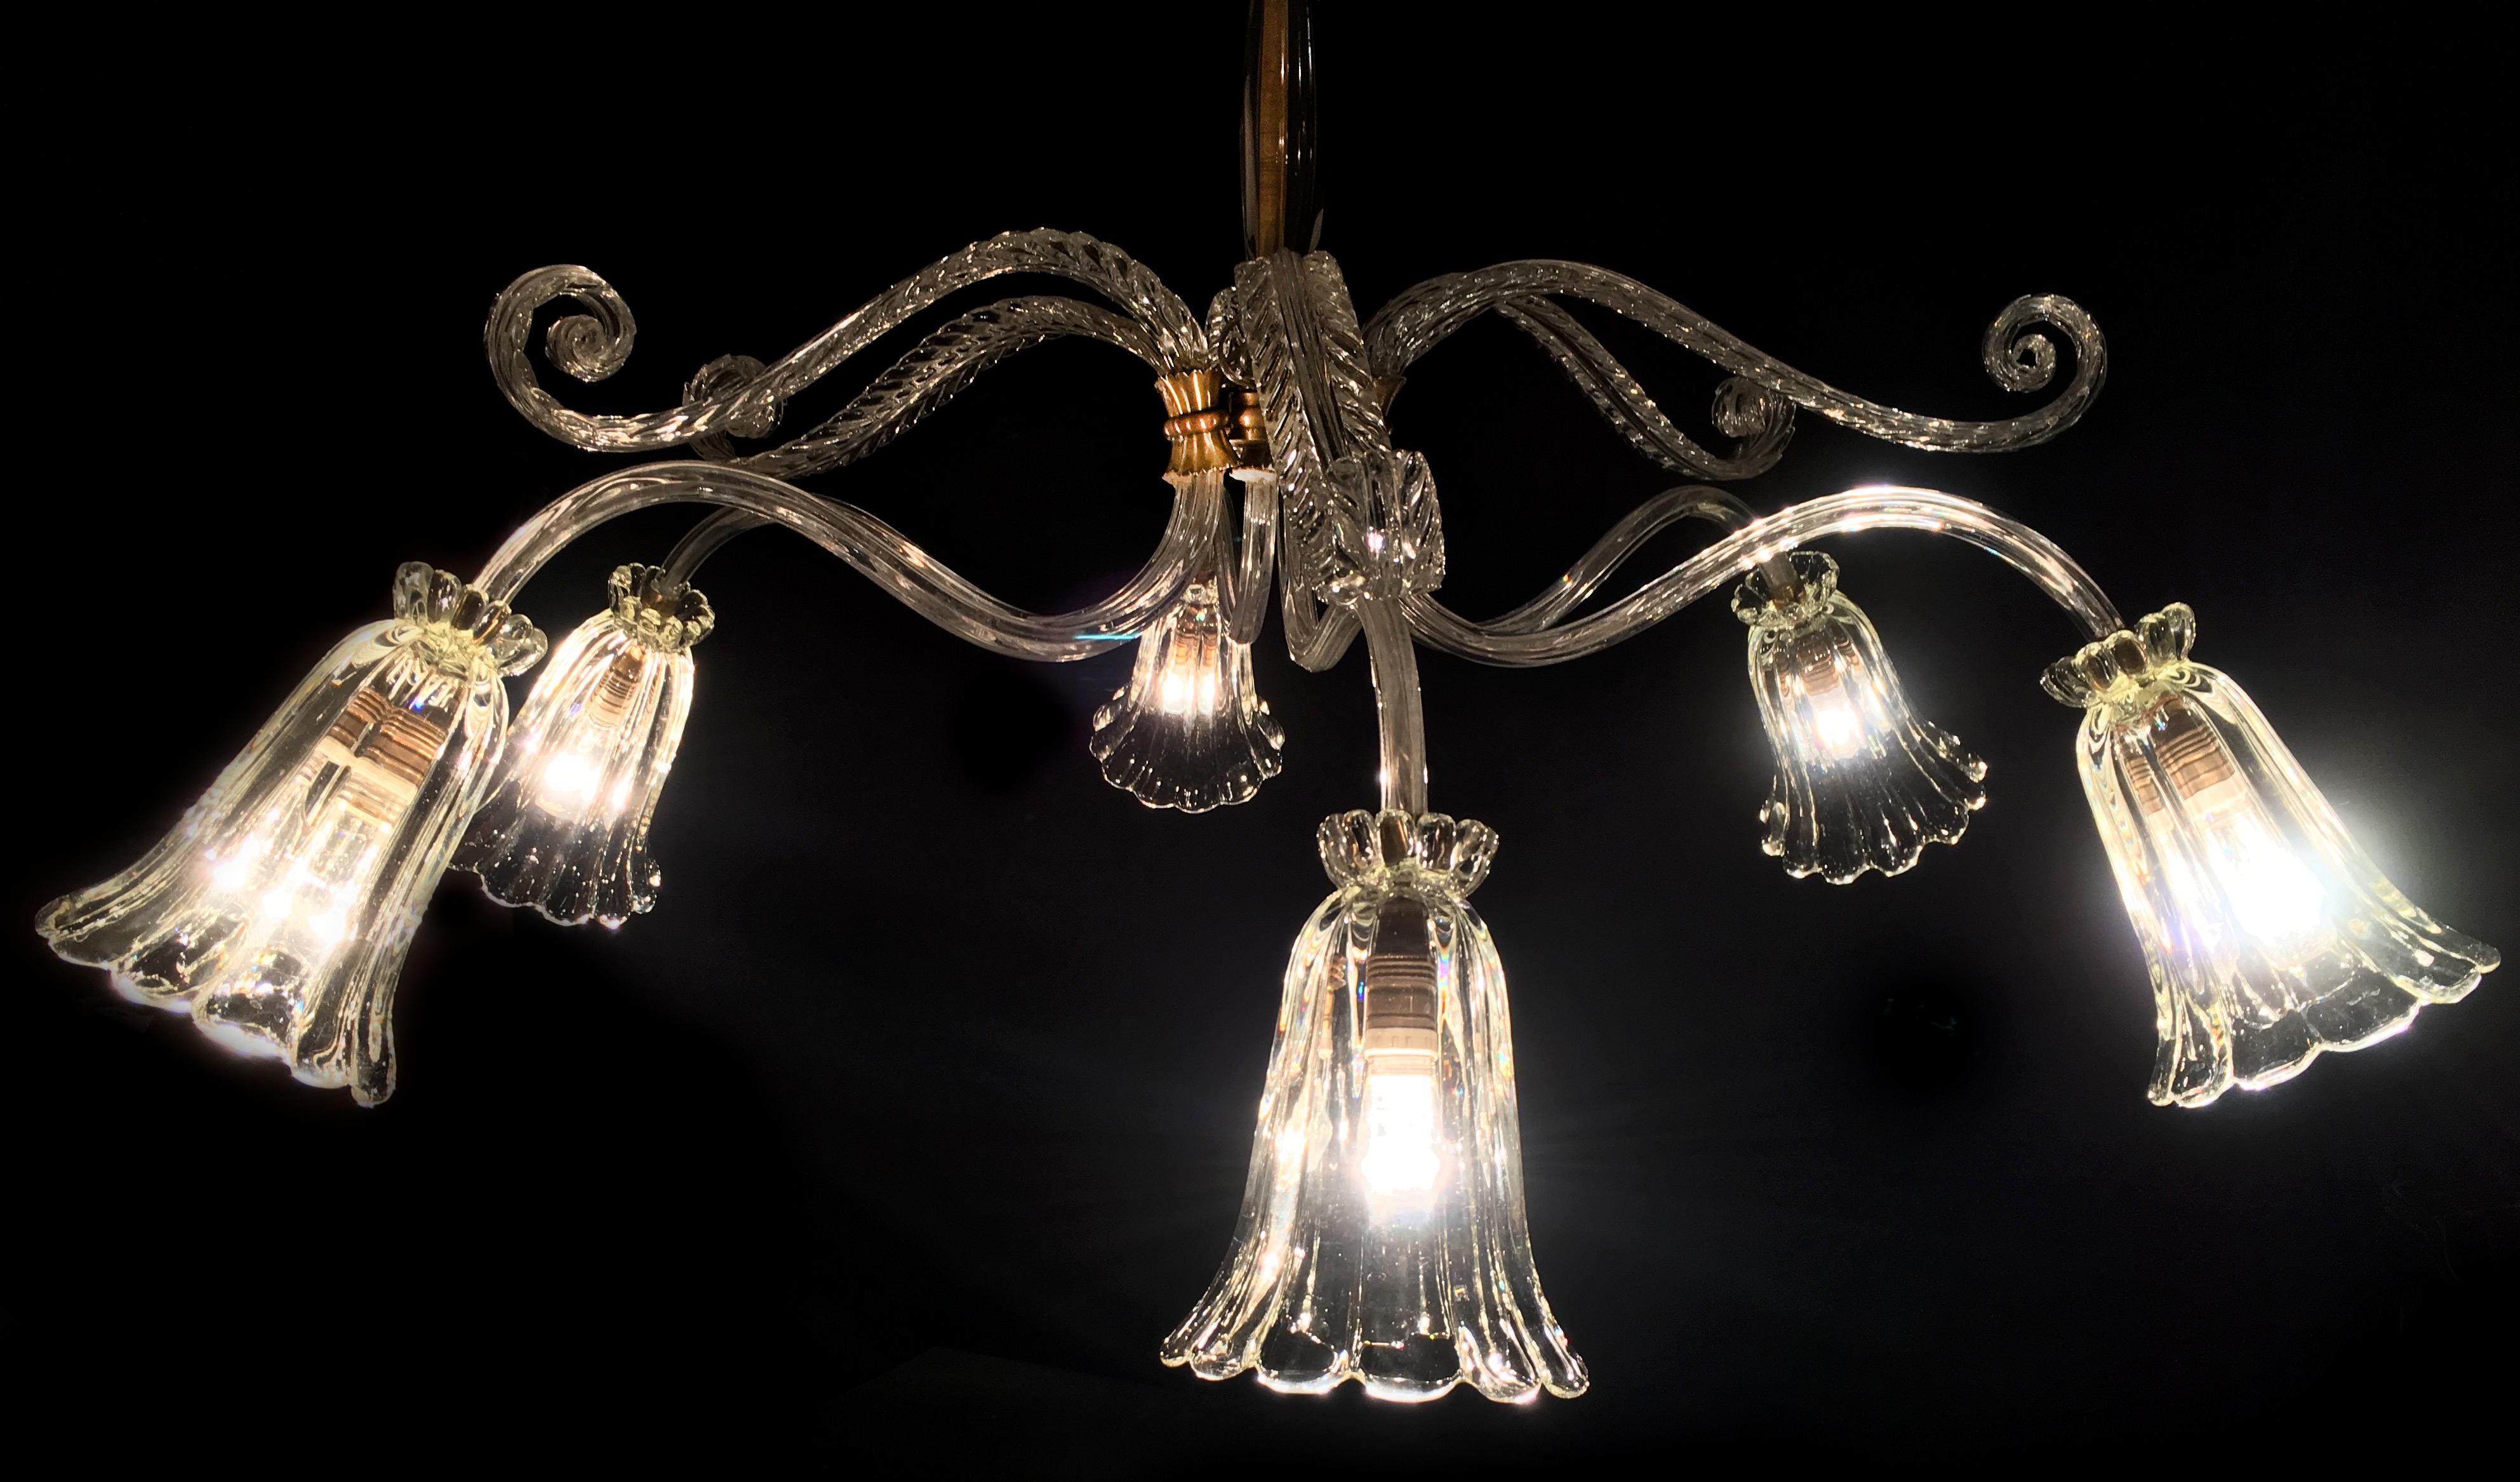 hand blown Murano chandelier by Ercole Barovier, circa 1940. From private collection Von plant Baron.